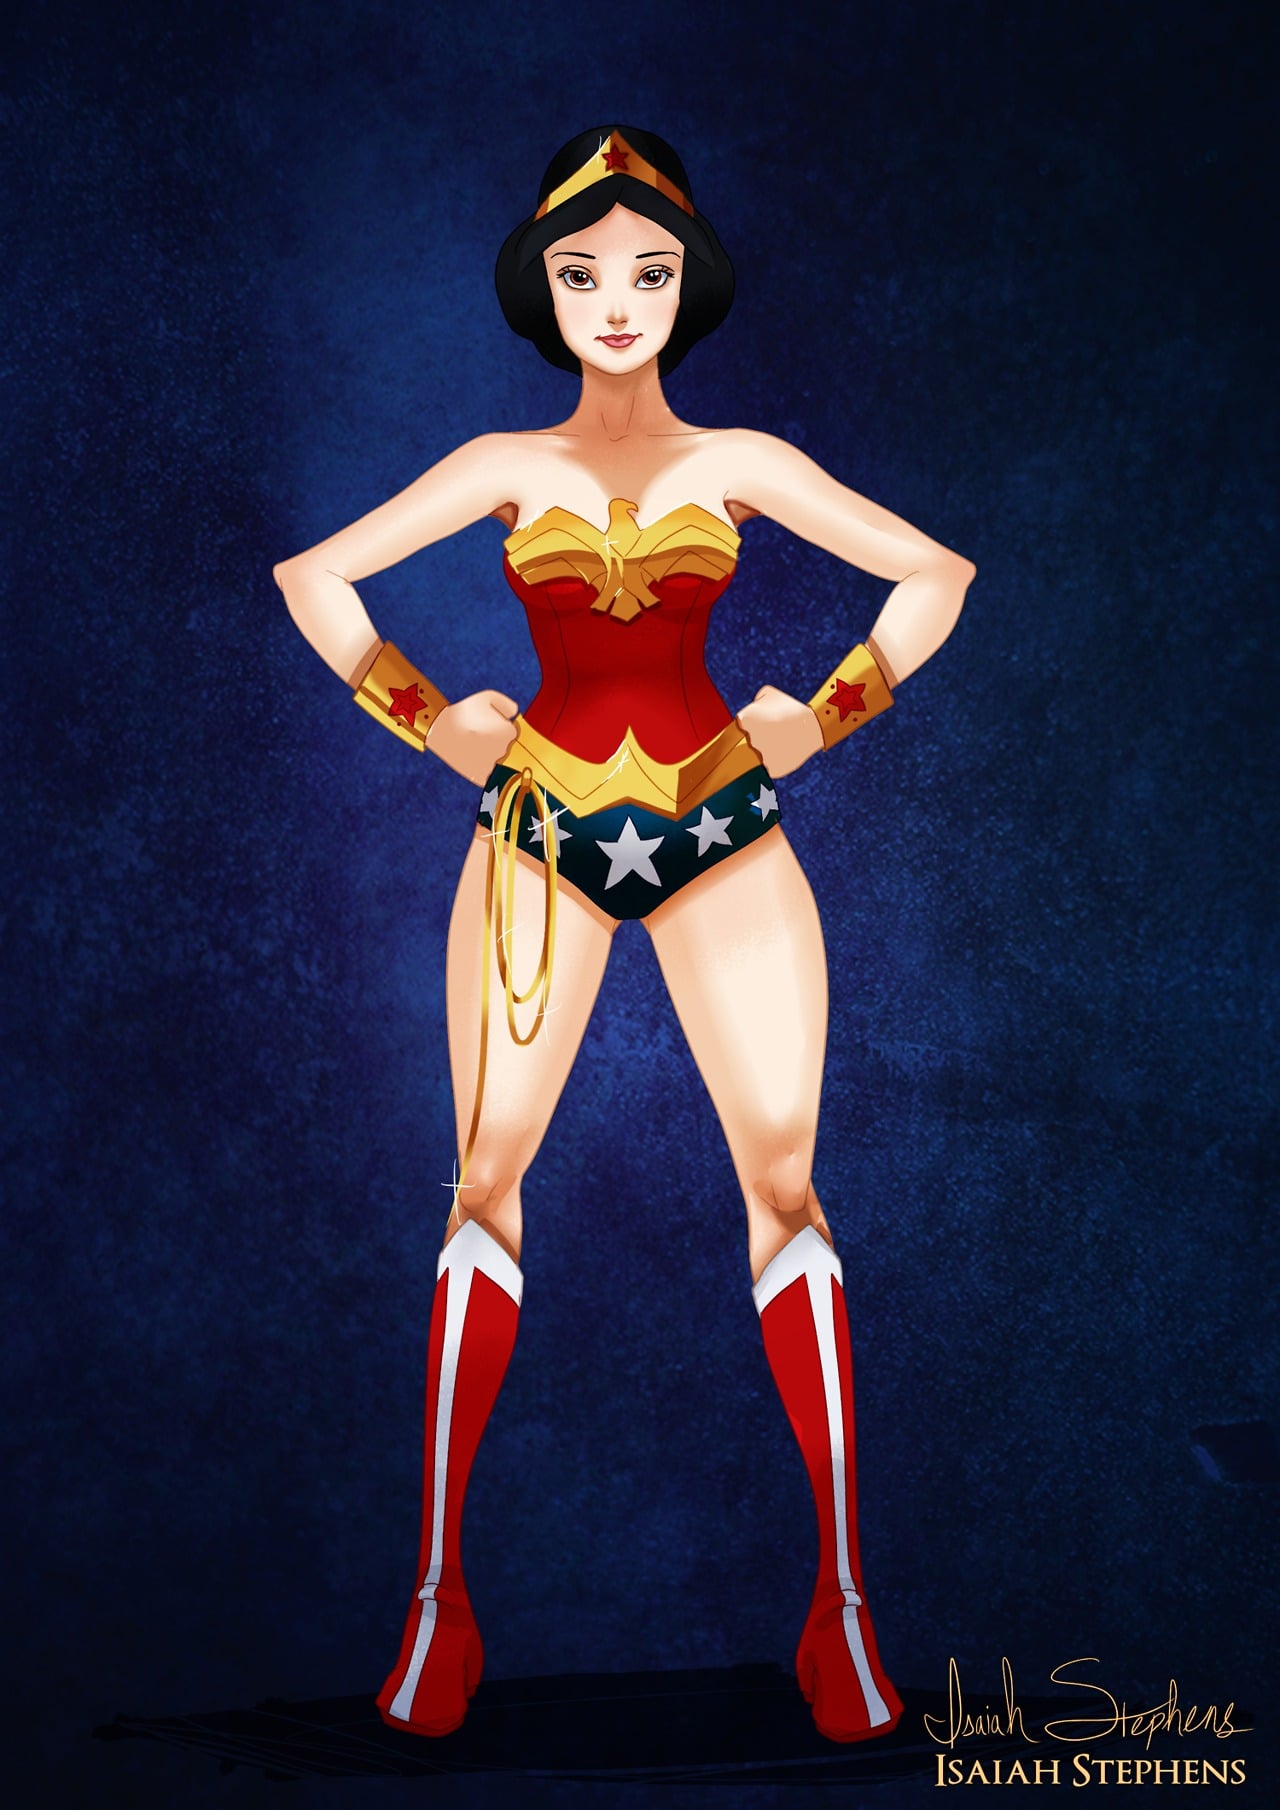 Snow White as Wonder Woman | These Artistic Takes on Disney Princesses Will Change Way You See Them Forever | POPSUGAR Love & Sex Photo 197